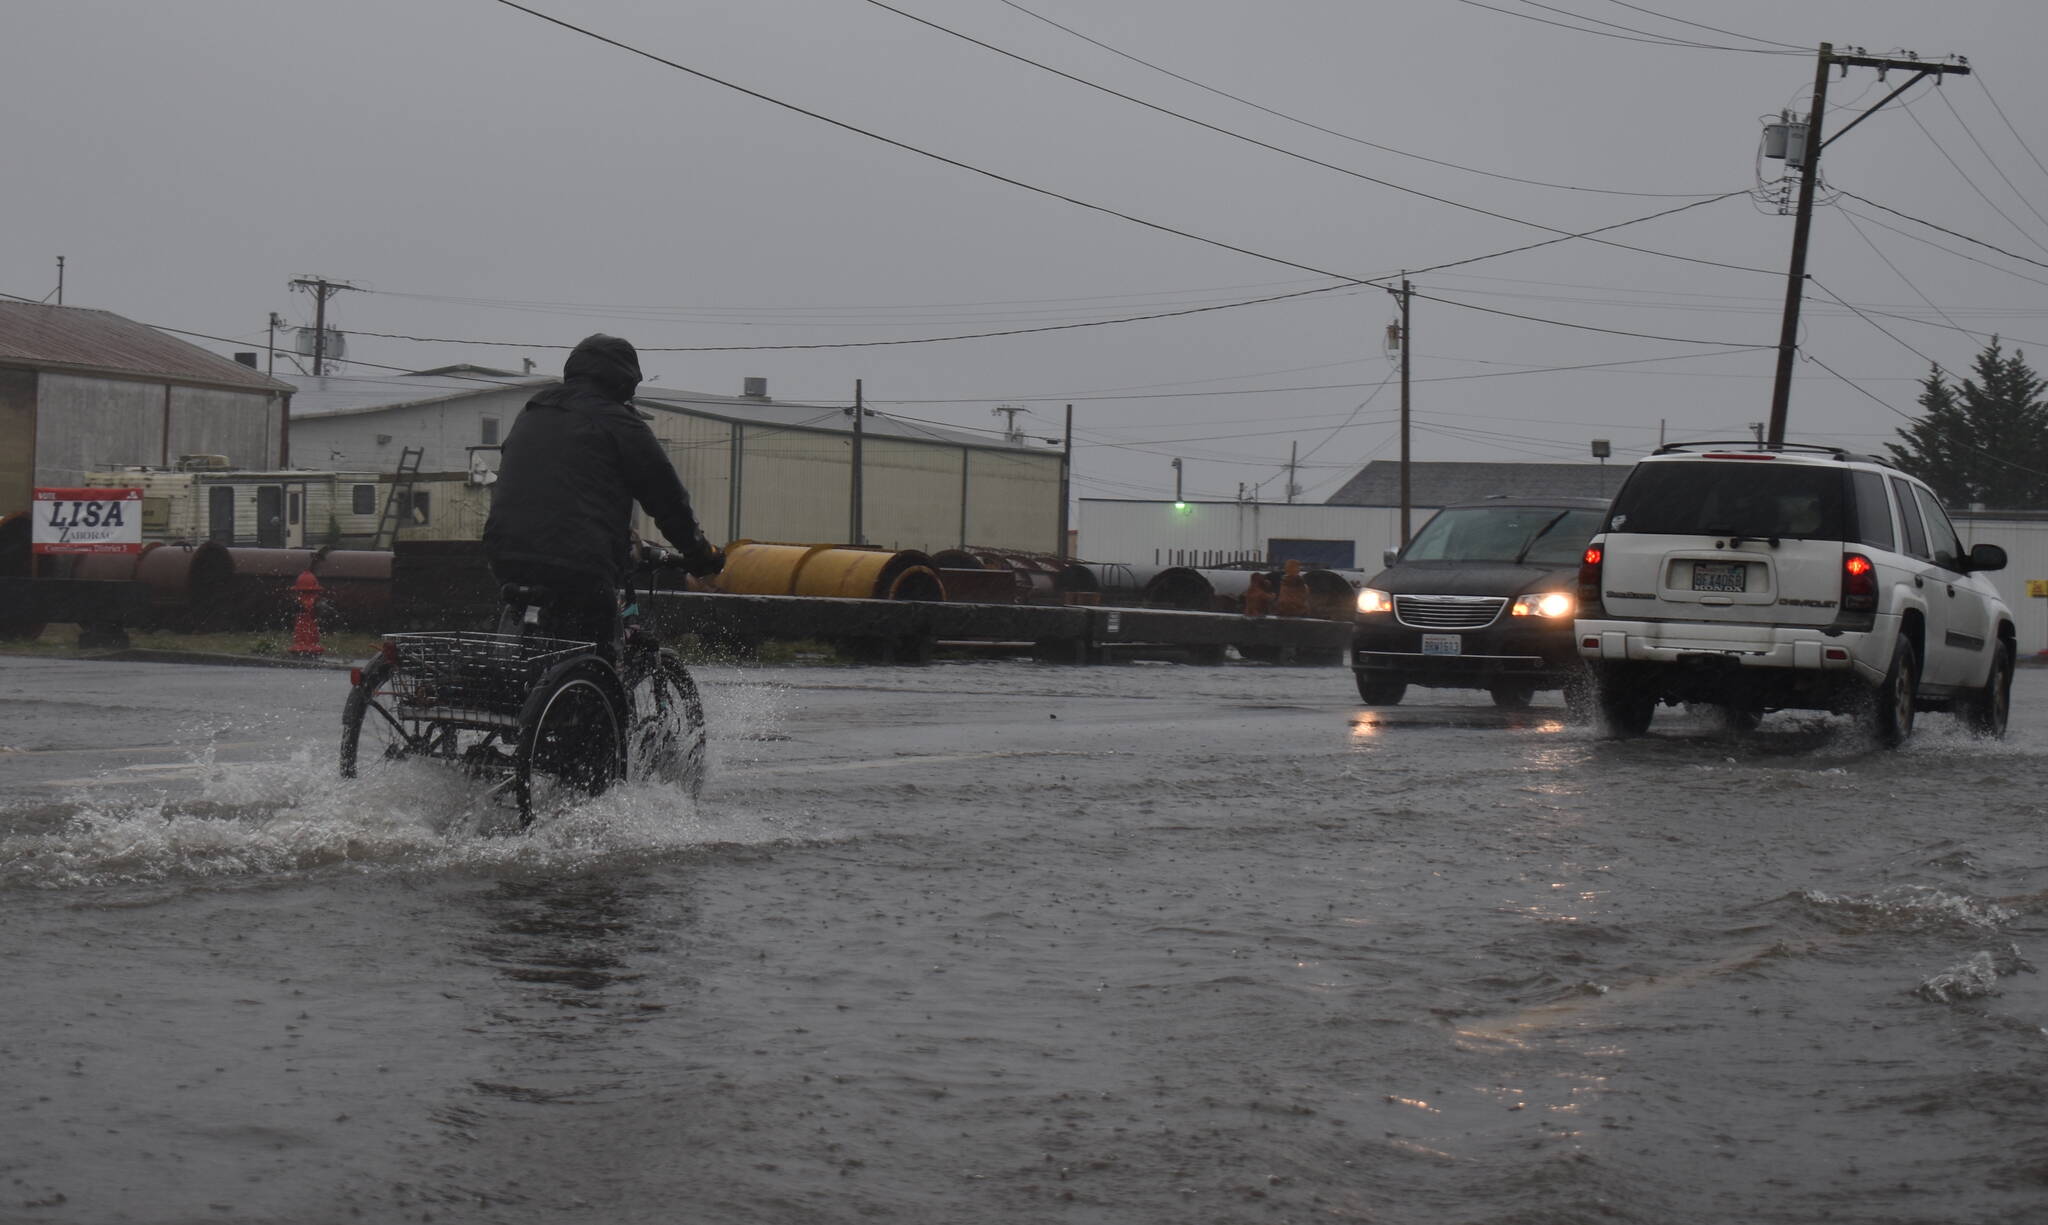 Clayton Franke / The Daily World
A biker rides through several inches of water on State Street in Aberdeen.